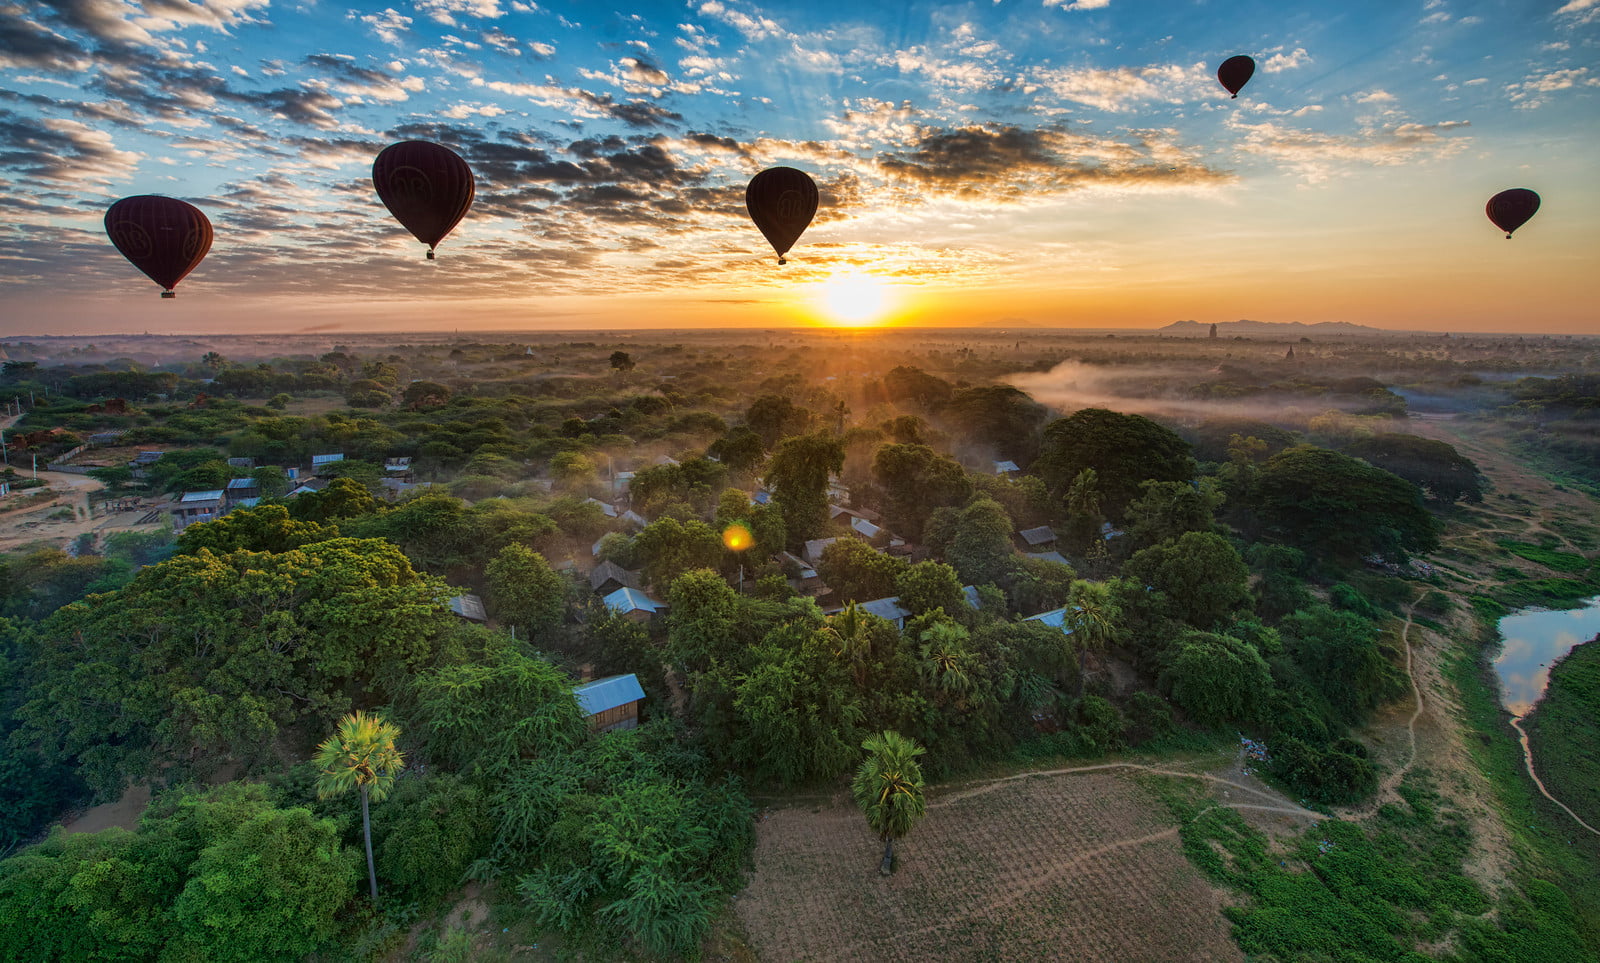 1600x1200 resolution | five black hot air balloon flying during sunset